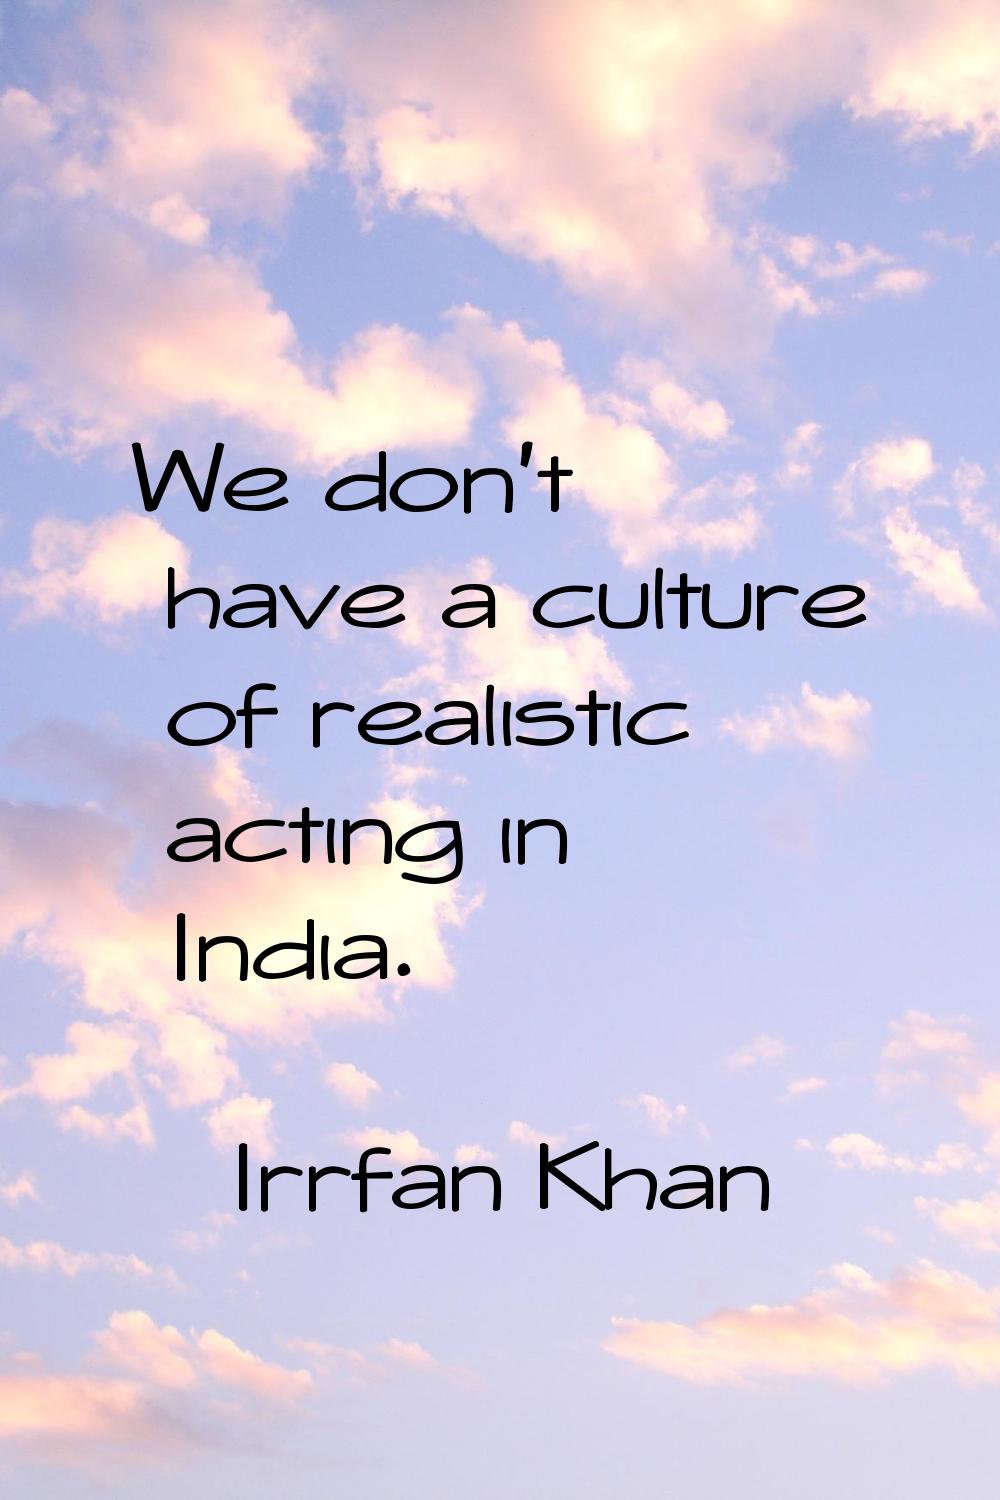 We don't have a culture of realistic acting in India.